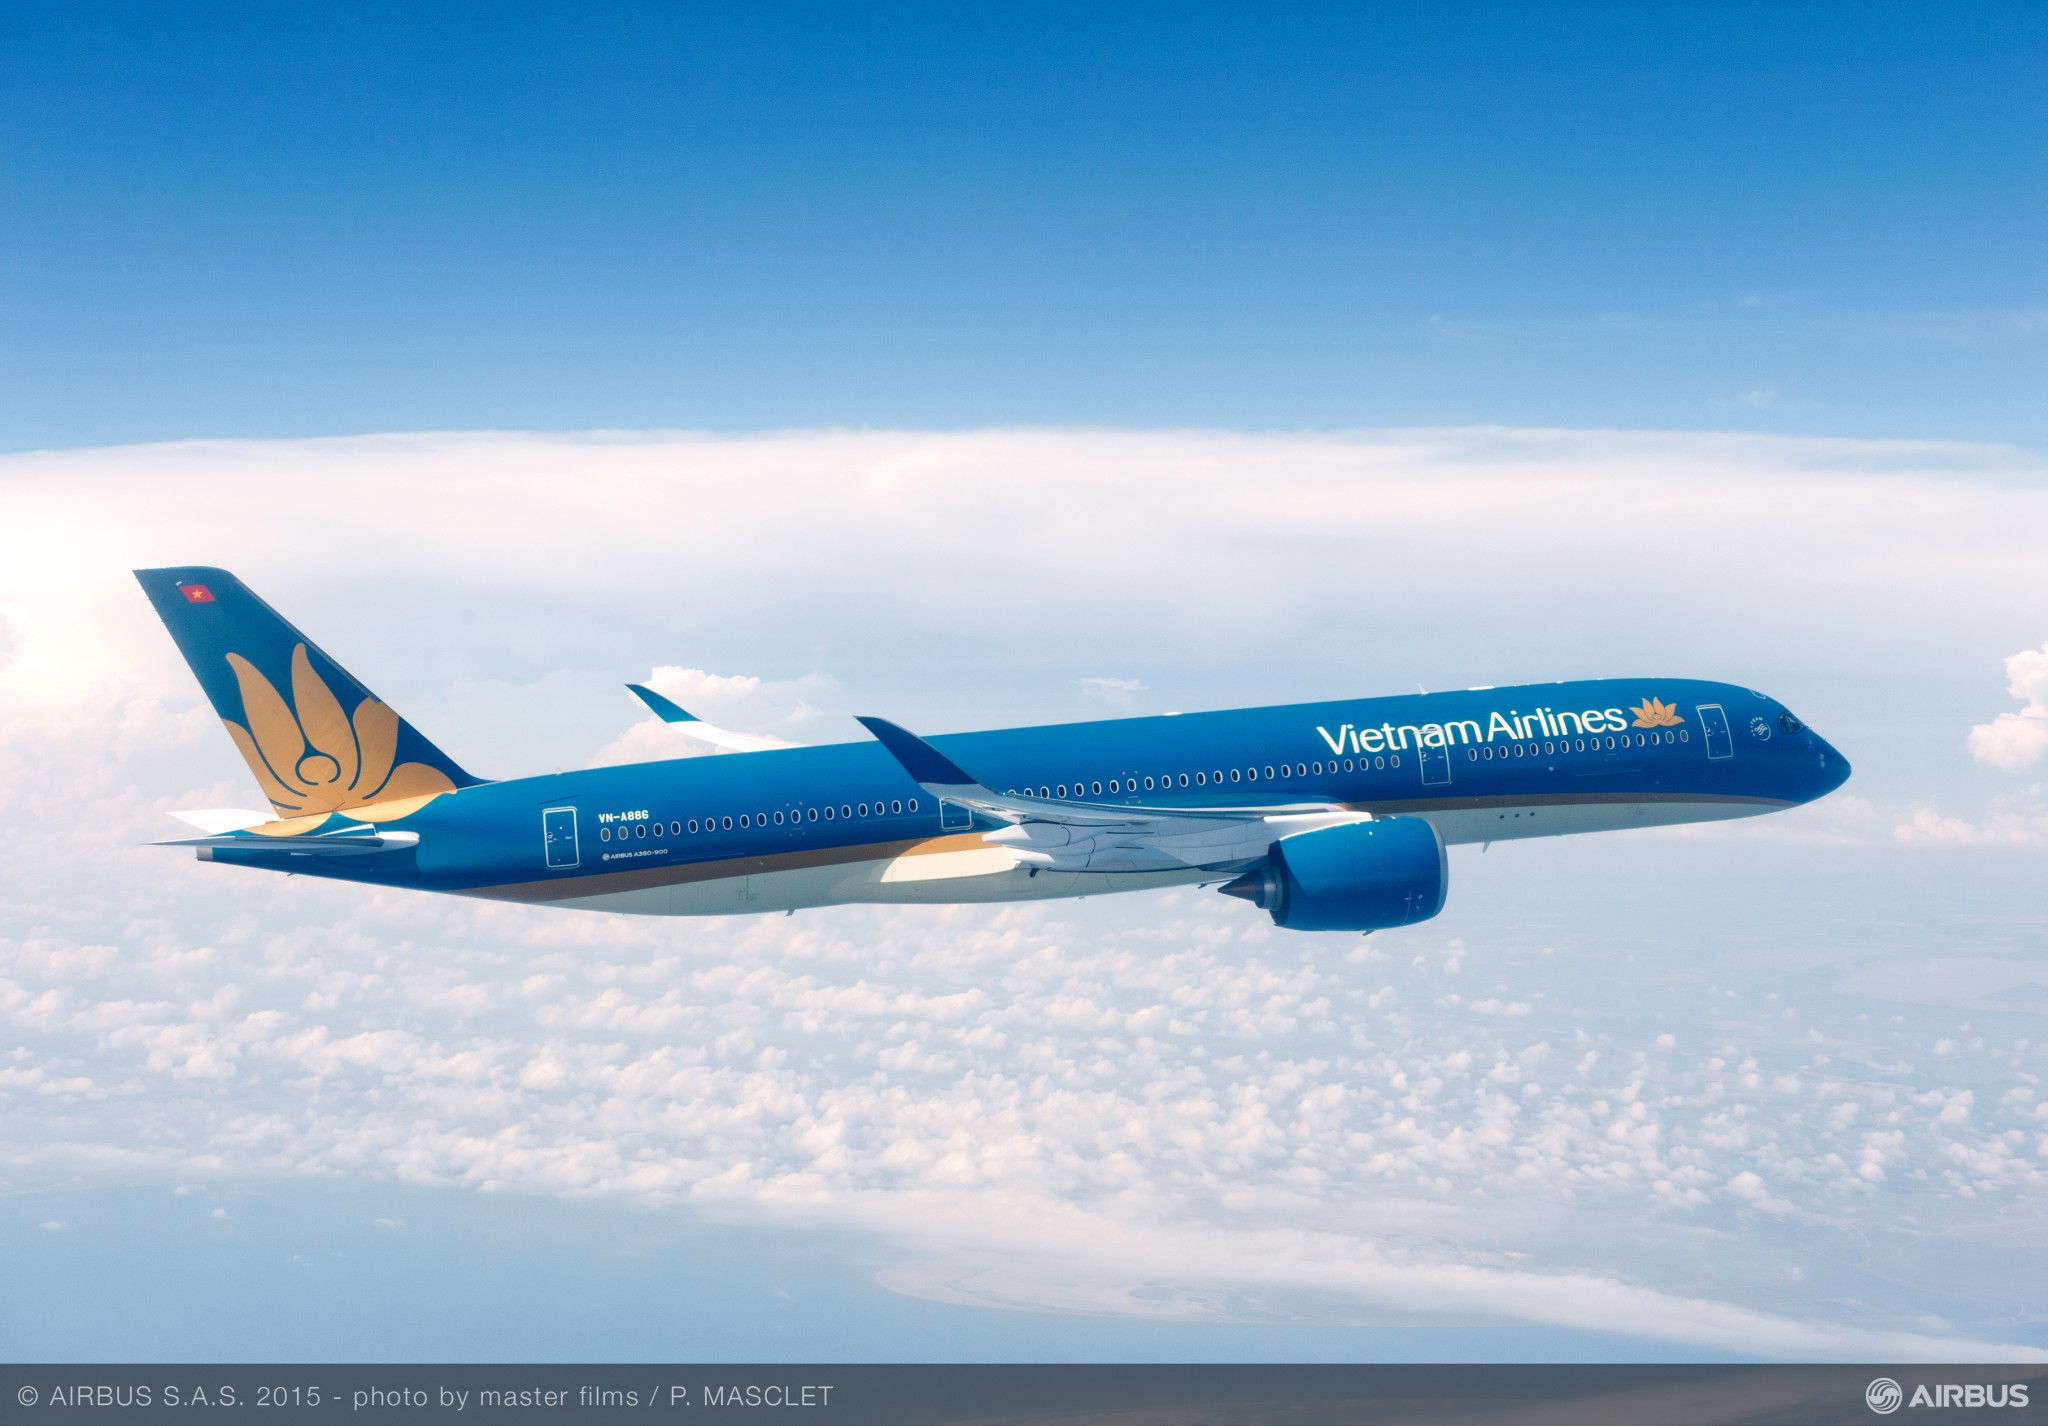 Vietnam Airlines resumes Hanoi-Hong Kong route as restrictions ease